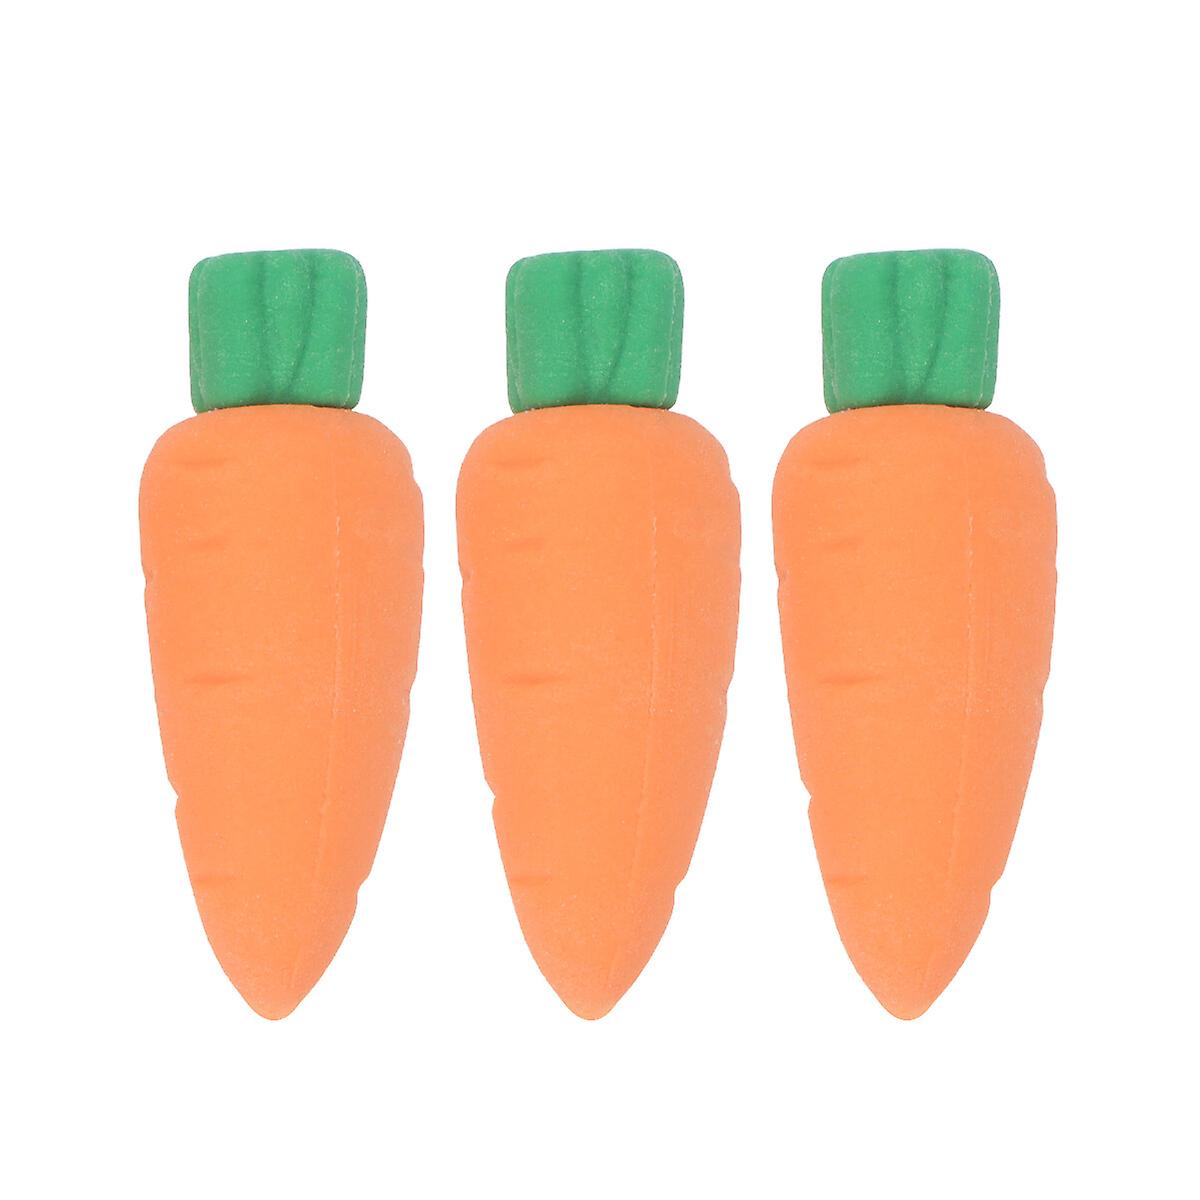 30pcs Novelty Carrot Shape Pencil Eraser Creative Stationery Office School Supplies Gift For Kids Students